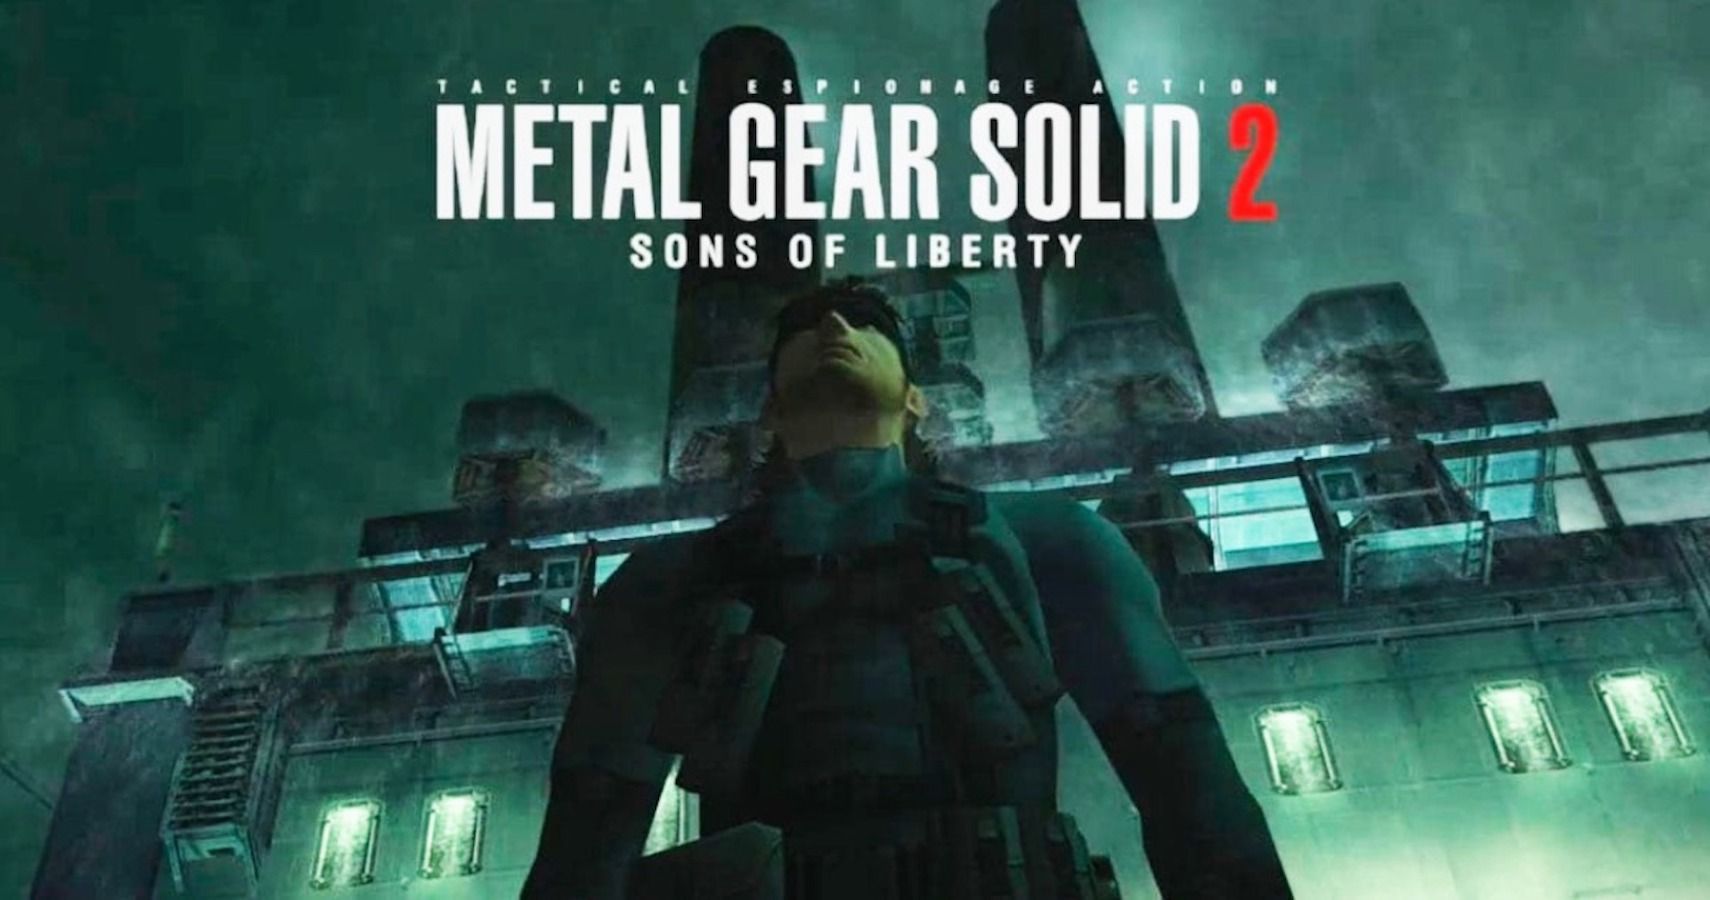 Metal gear solid 2 title card solid snake